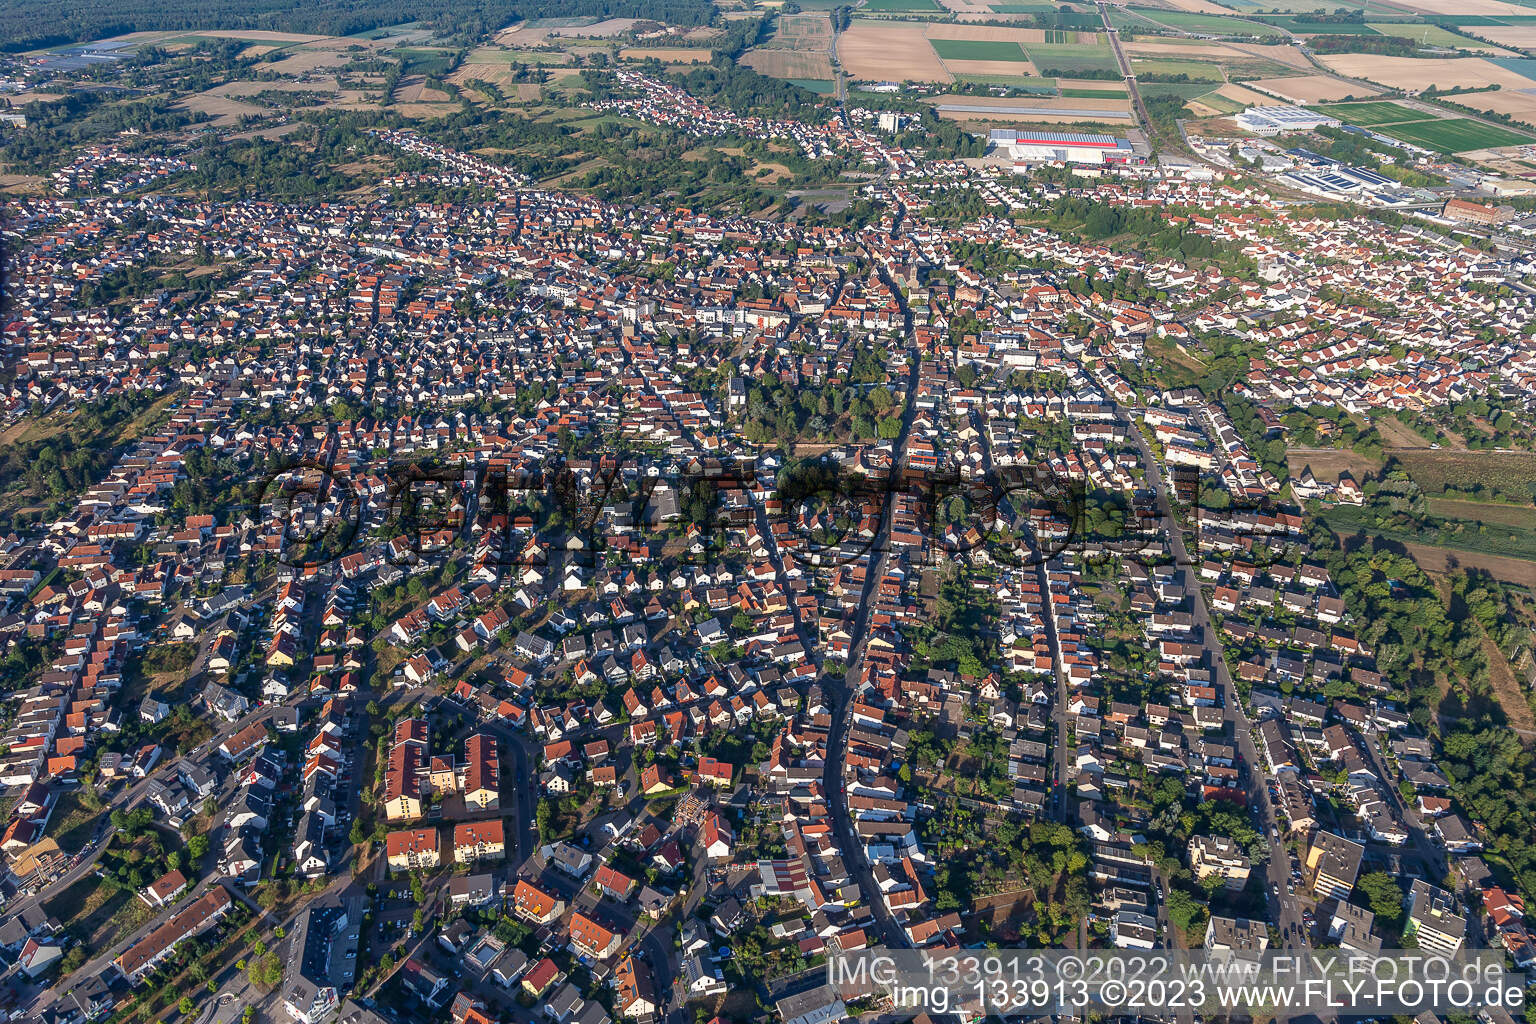 Schifferstadt in the state Rhineland-Palatinate, Germany seen from above